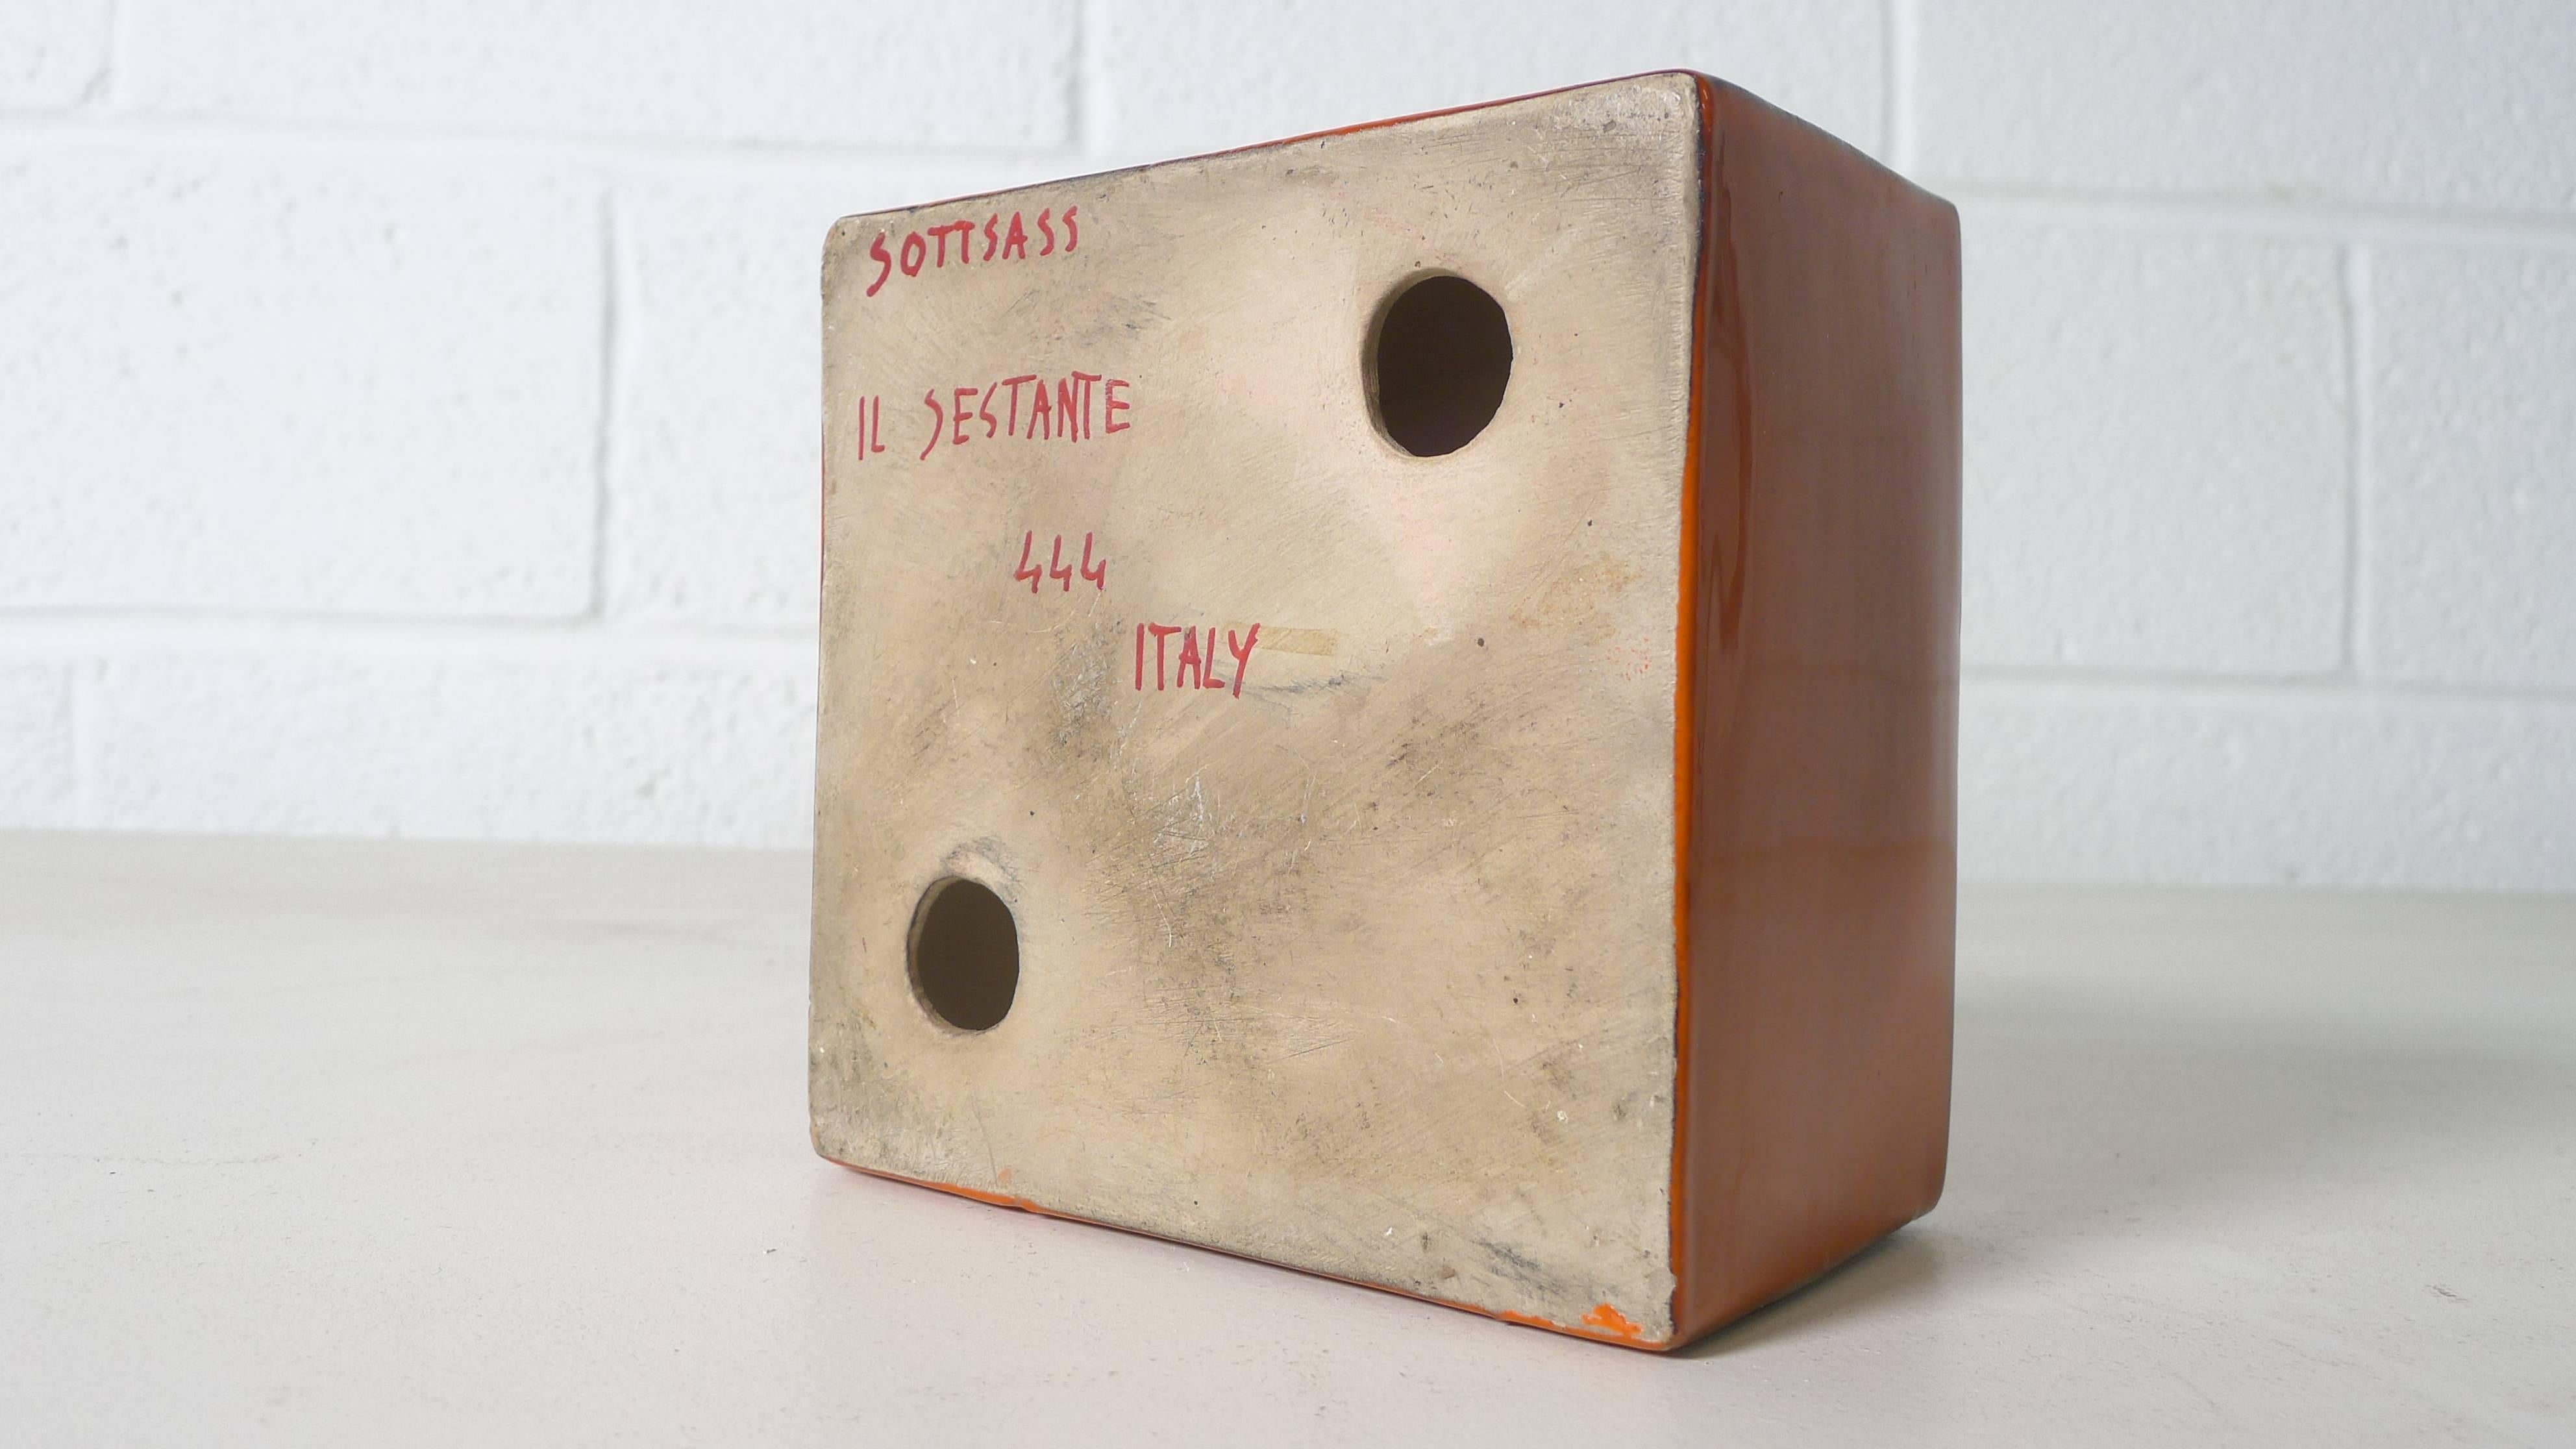 Mid-Century Modern Ettore Sottsass Ceramic for Il Sestante, Italy, 1962, Signed and Documented